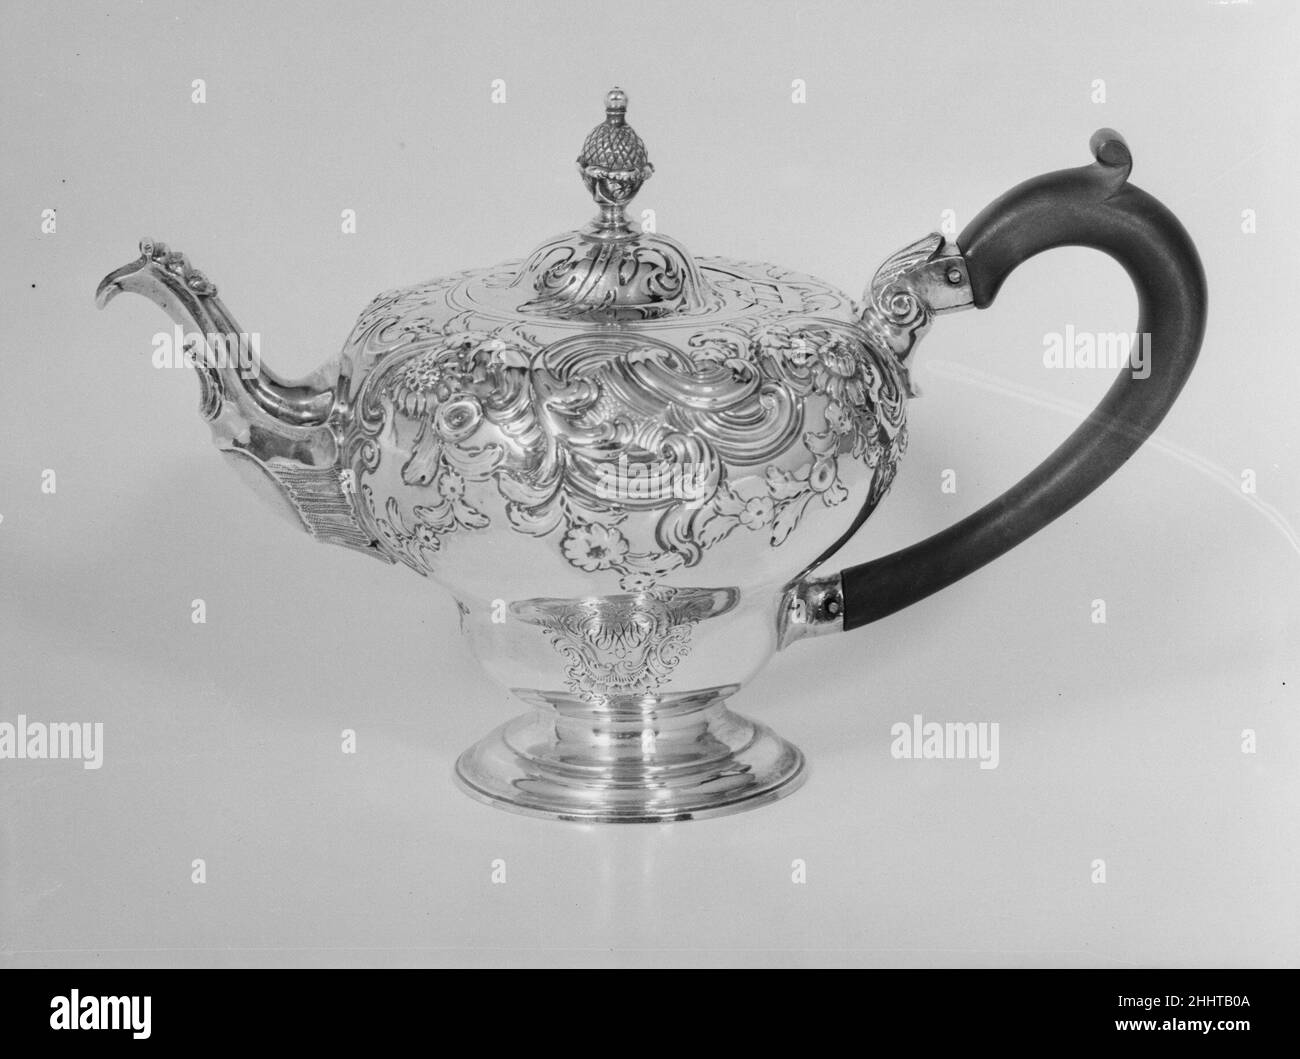 Teapot 1753–54 Thomas Whipham British Repoussé decoration was achieved by hammering silver from the inside to create brilliant, raised textural effects on the outside. Silver vessels in inverted pear shapes were popular in the mid-eighteenth century, and the asymmetrical arrangement of flora and fauna seen here is typical of the Rococo style.. Teapot. British, London. 1753–54. Silver. Metalwork-Silver Stock Photo